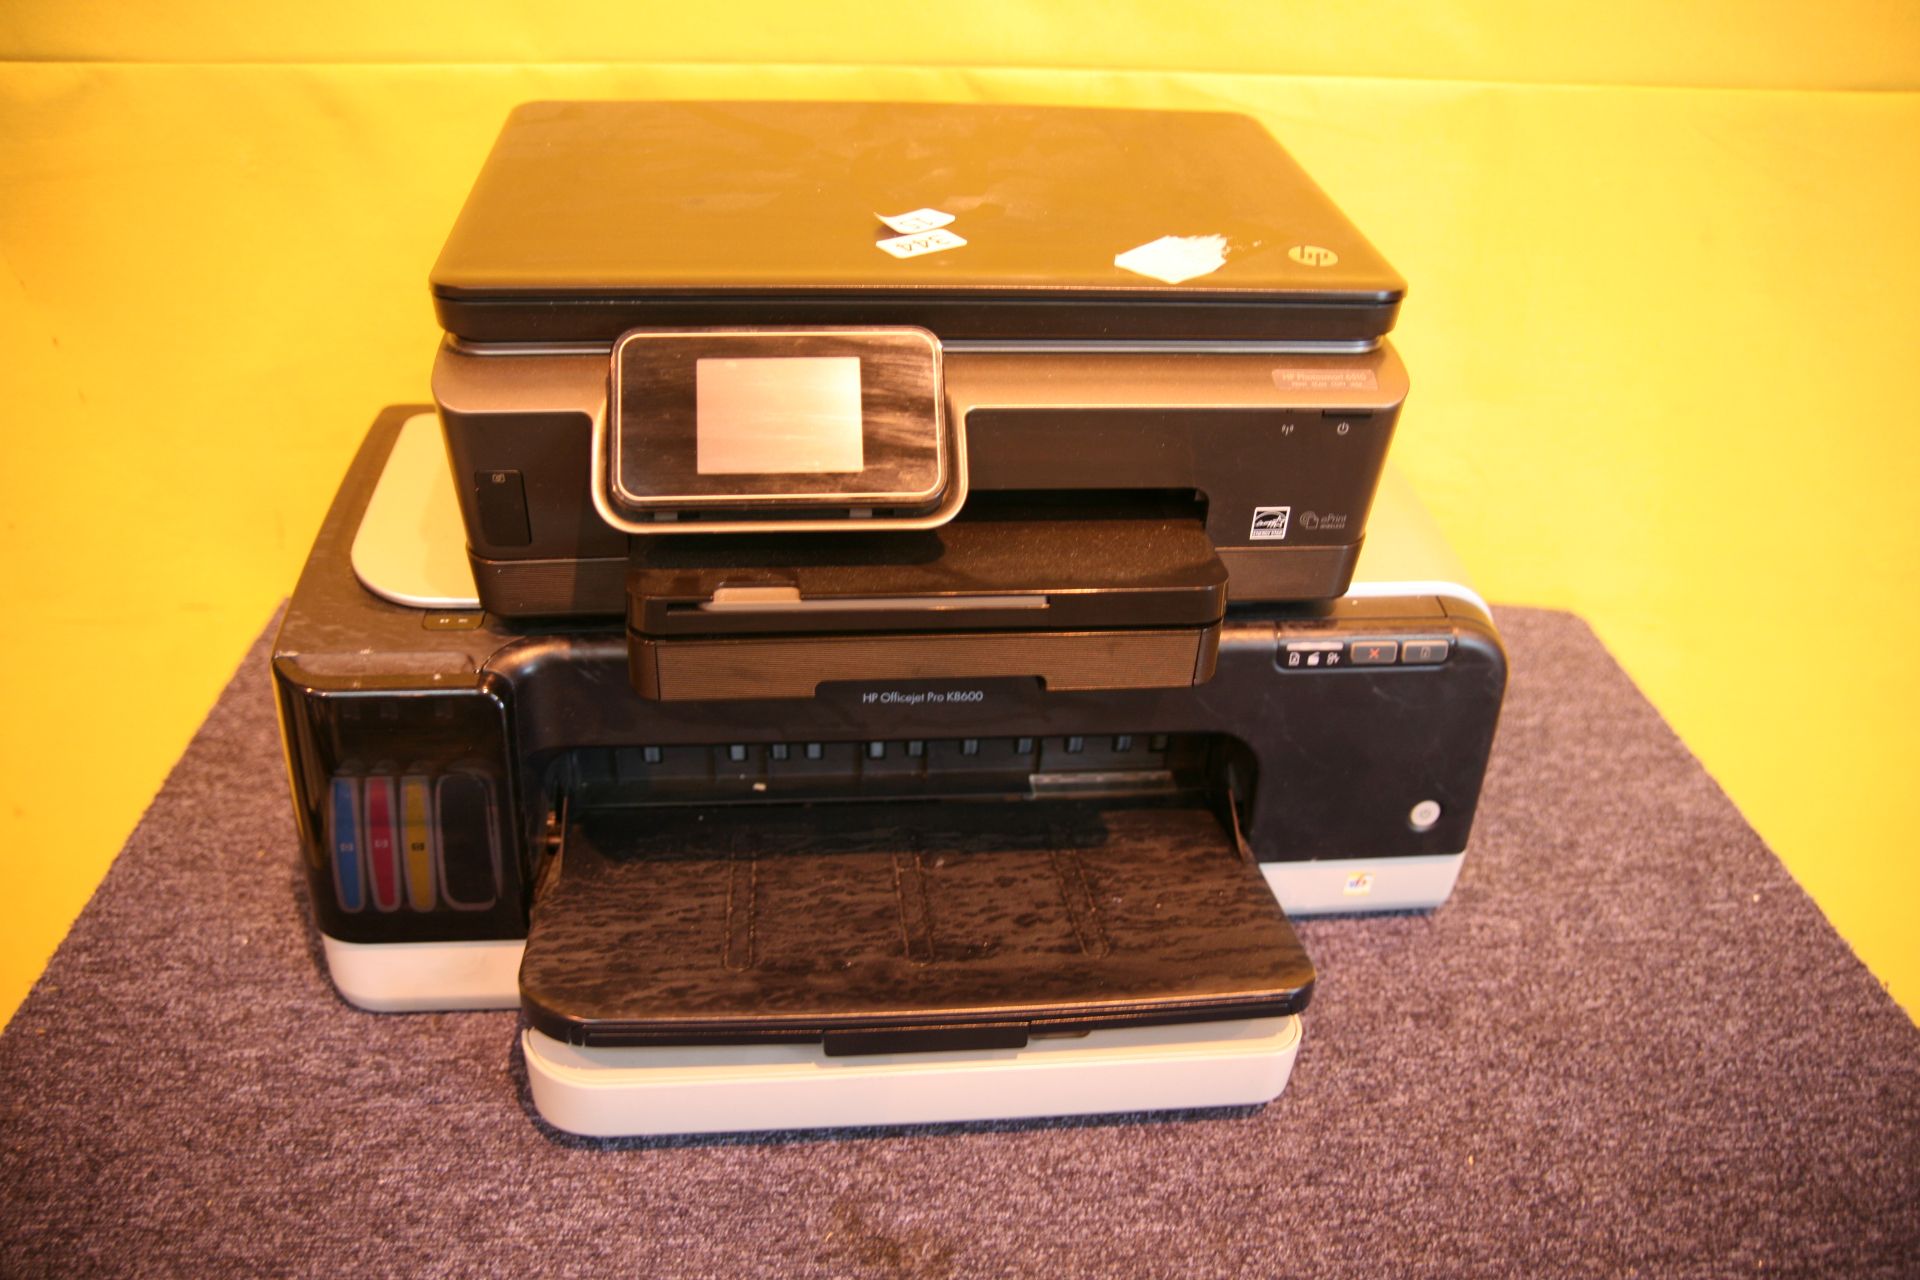 2x HP Printer (Photo Smart 6510 And Officejet Pro K8600) (MES-DISP-0044)